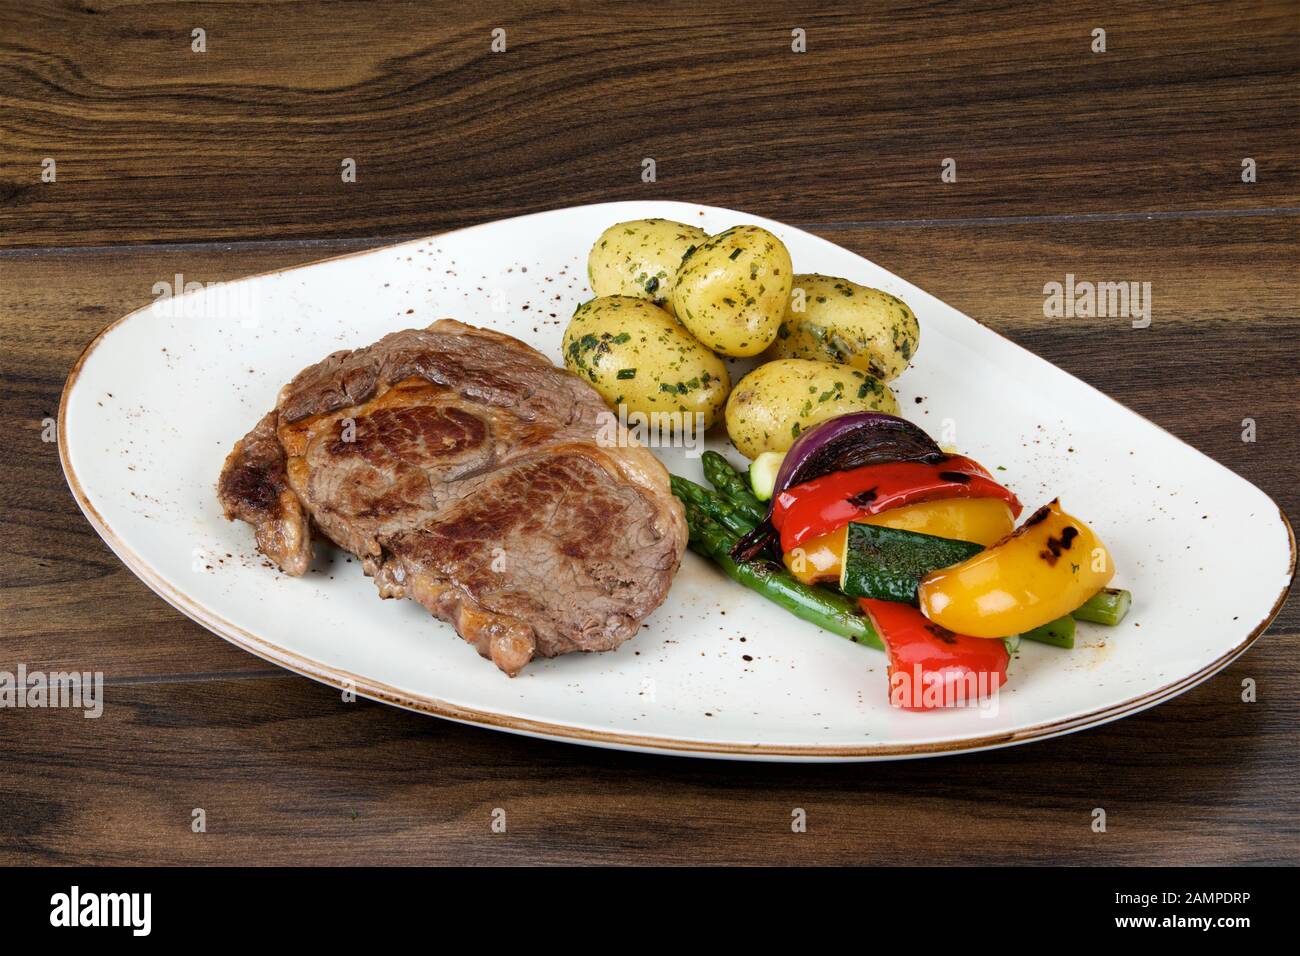 Irish sirloin steak served with baby new potatoes and roasted vegetables. Stock Photo